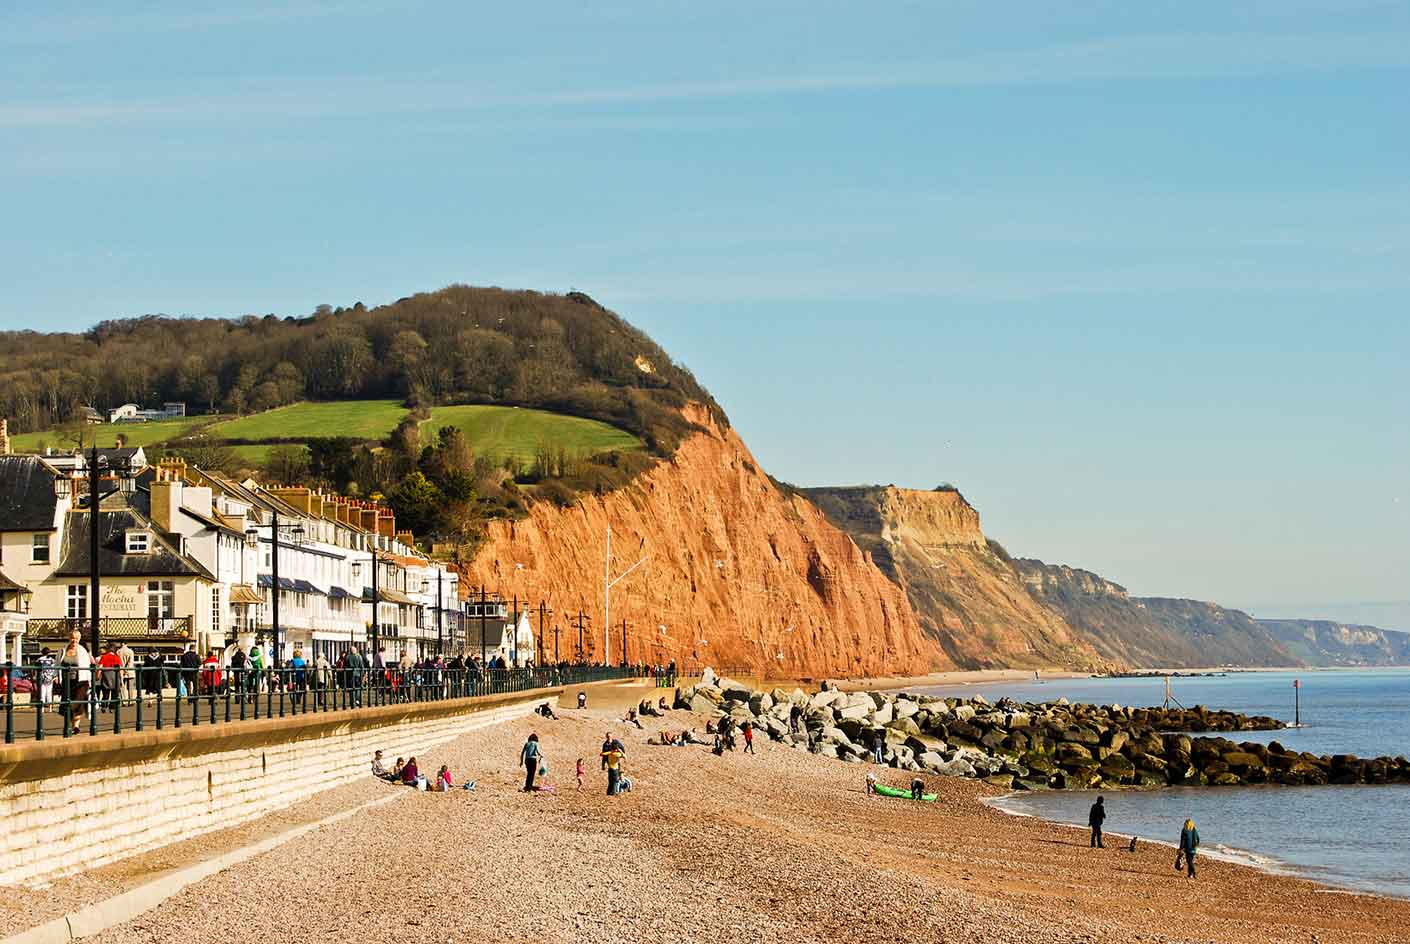 Sidmouth seafront with red cliffs of Jurassic Coast, Devon England